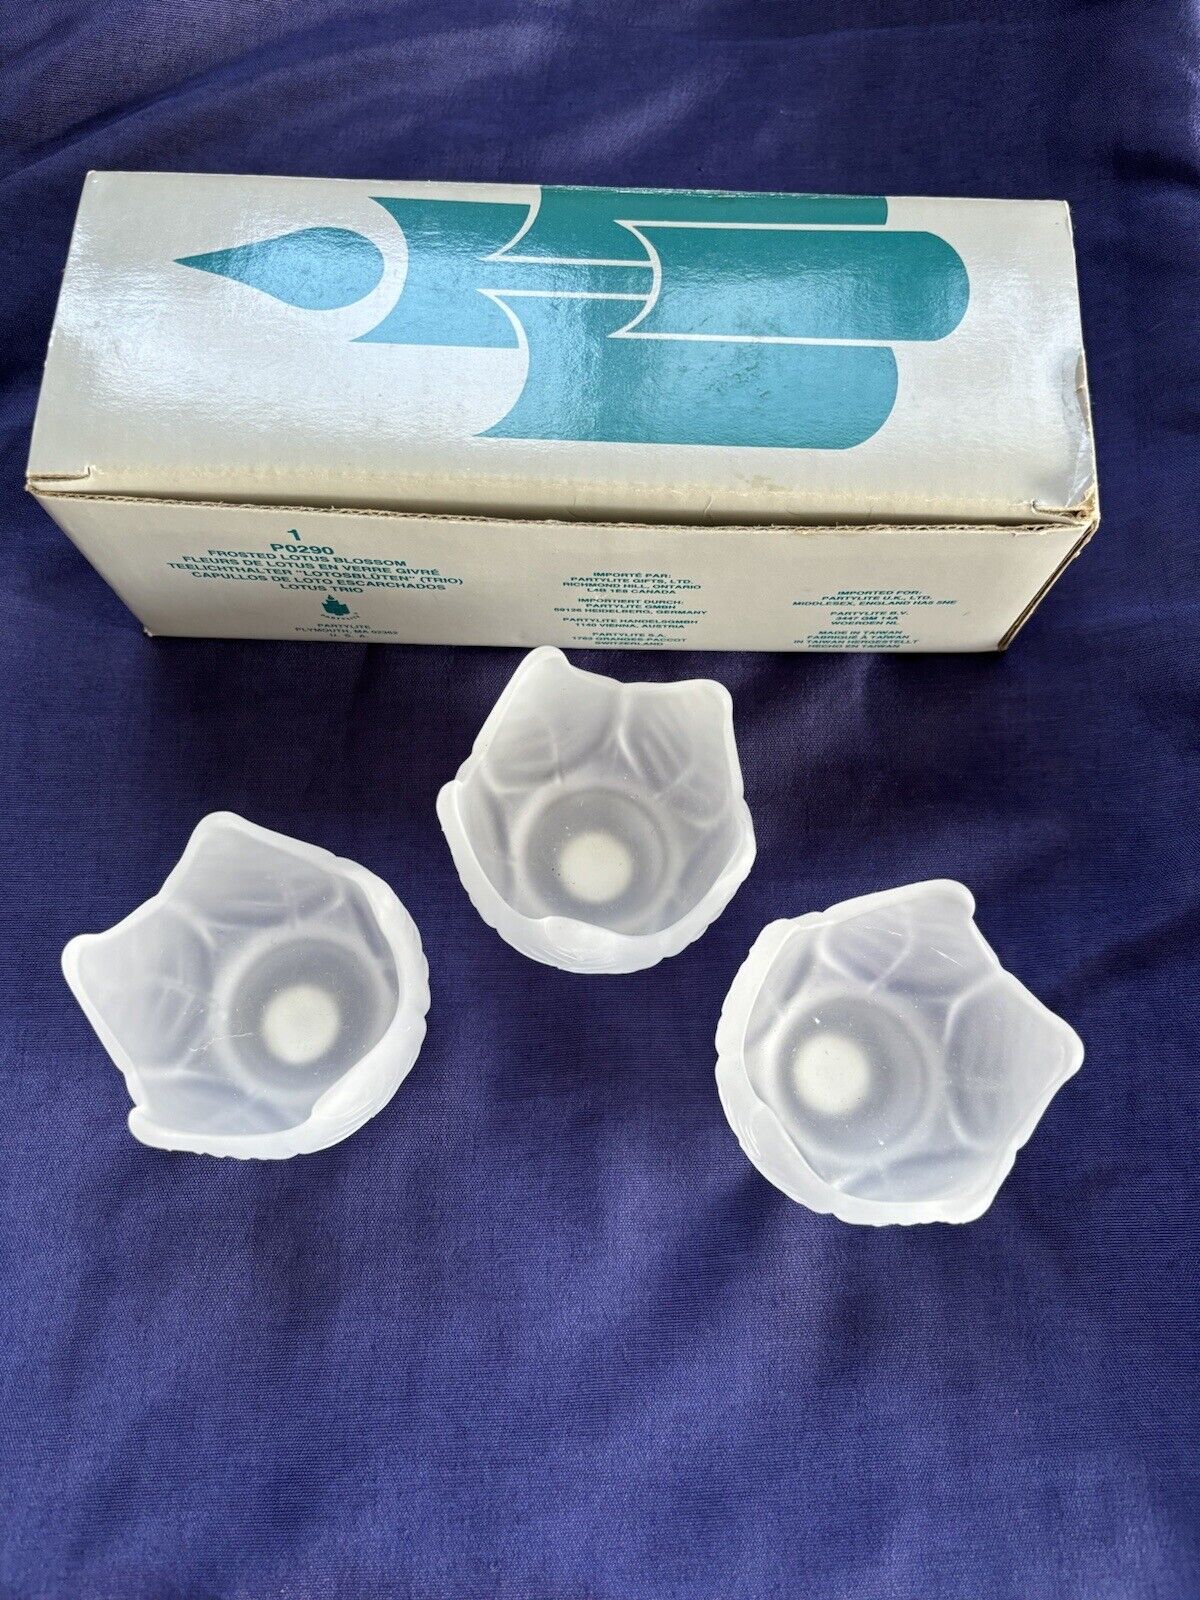 PartyLite 3 Frosted Lotus Blossom Votive Candle Holders P0290 In Original Box 